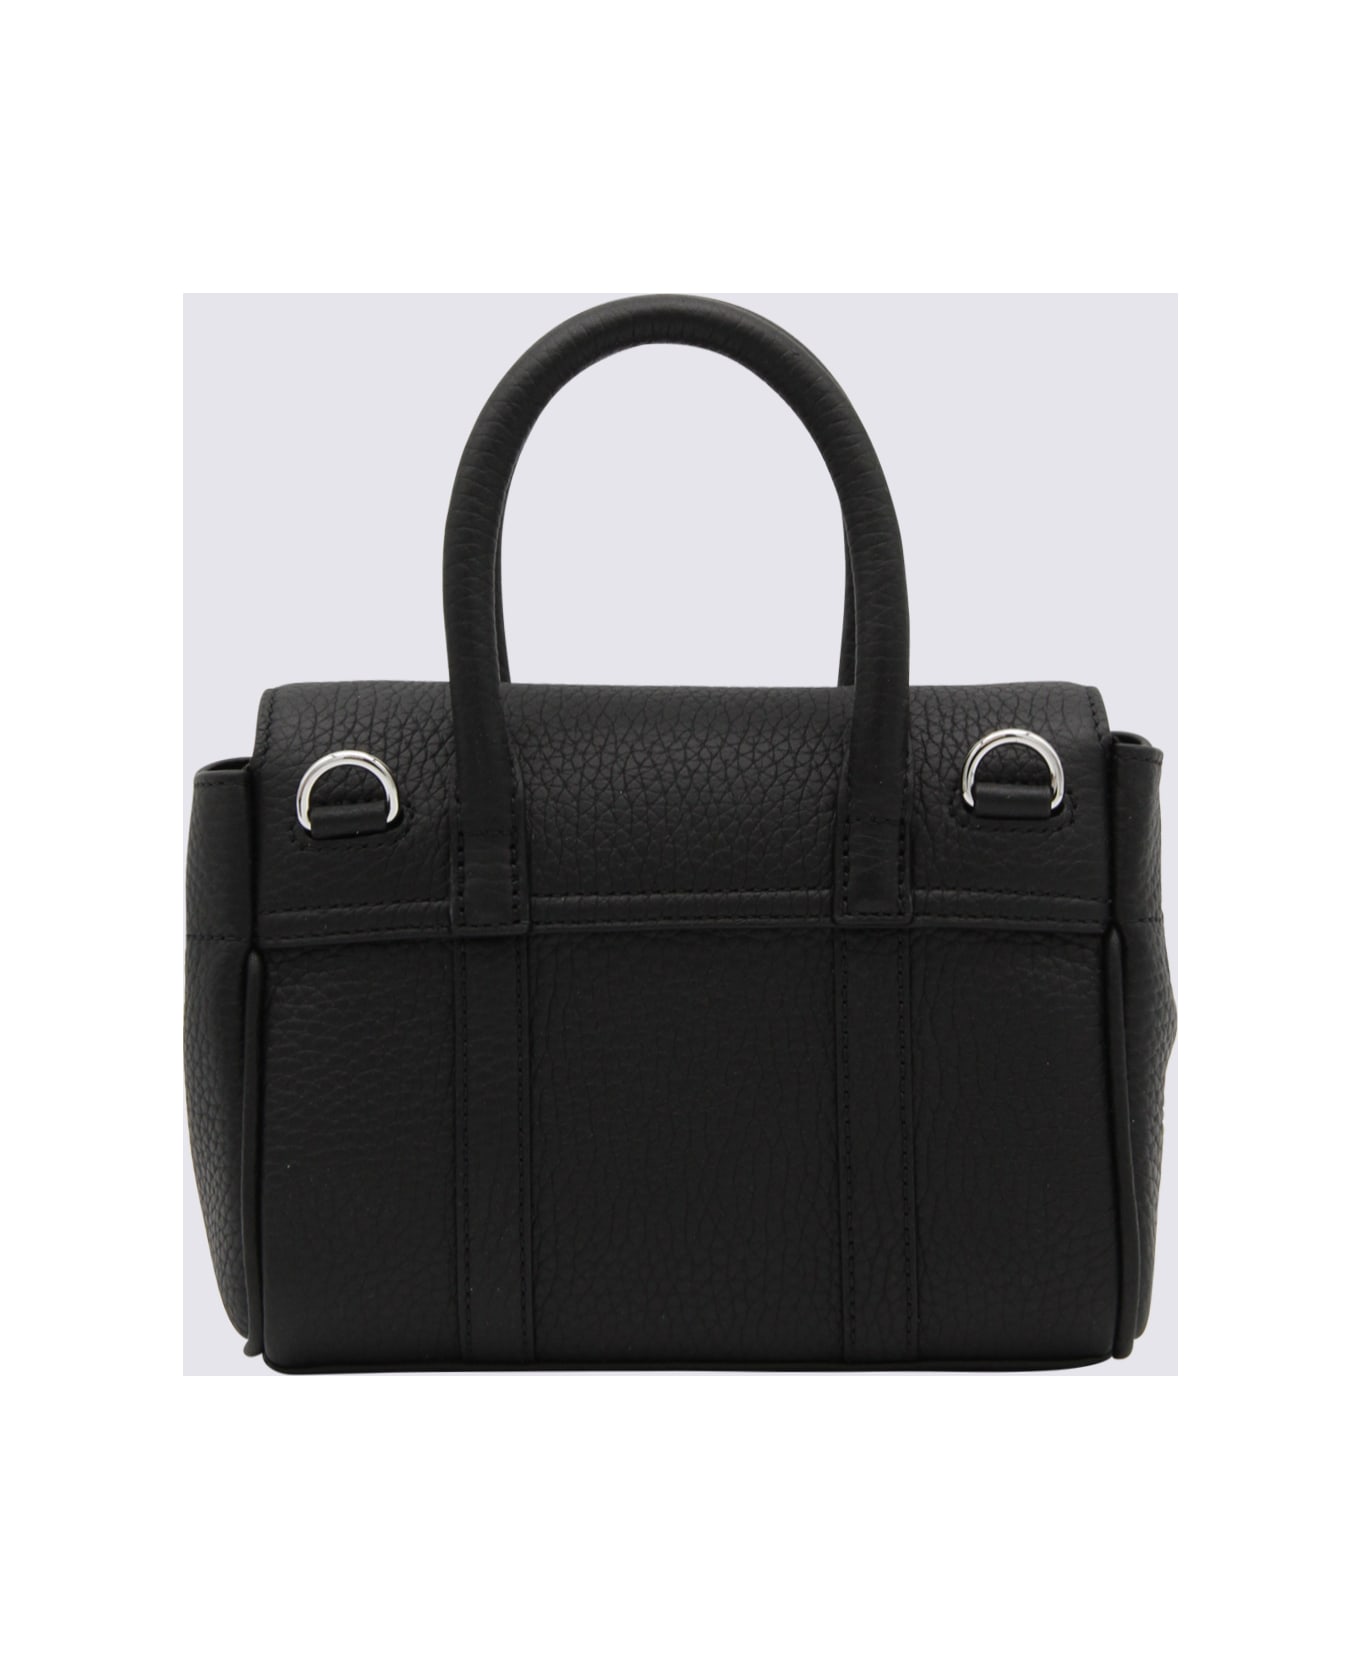 Mulberry Black Leather Mini Bayswater Heavy Top Handle Bag - Black トートバッグ